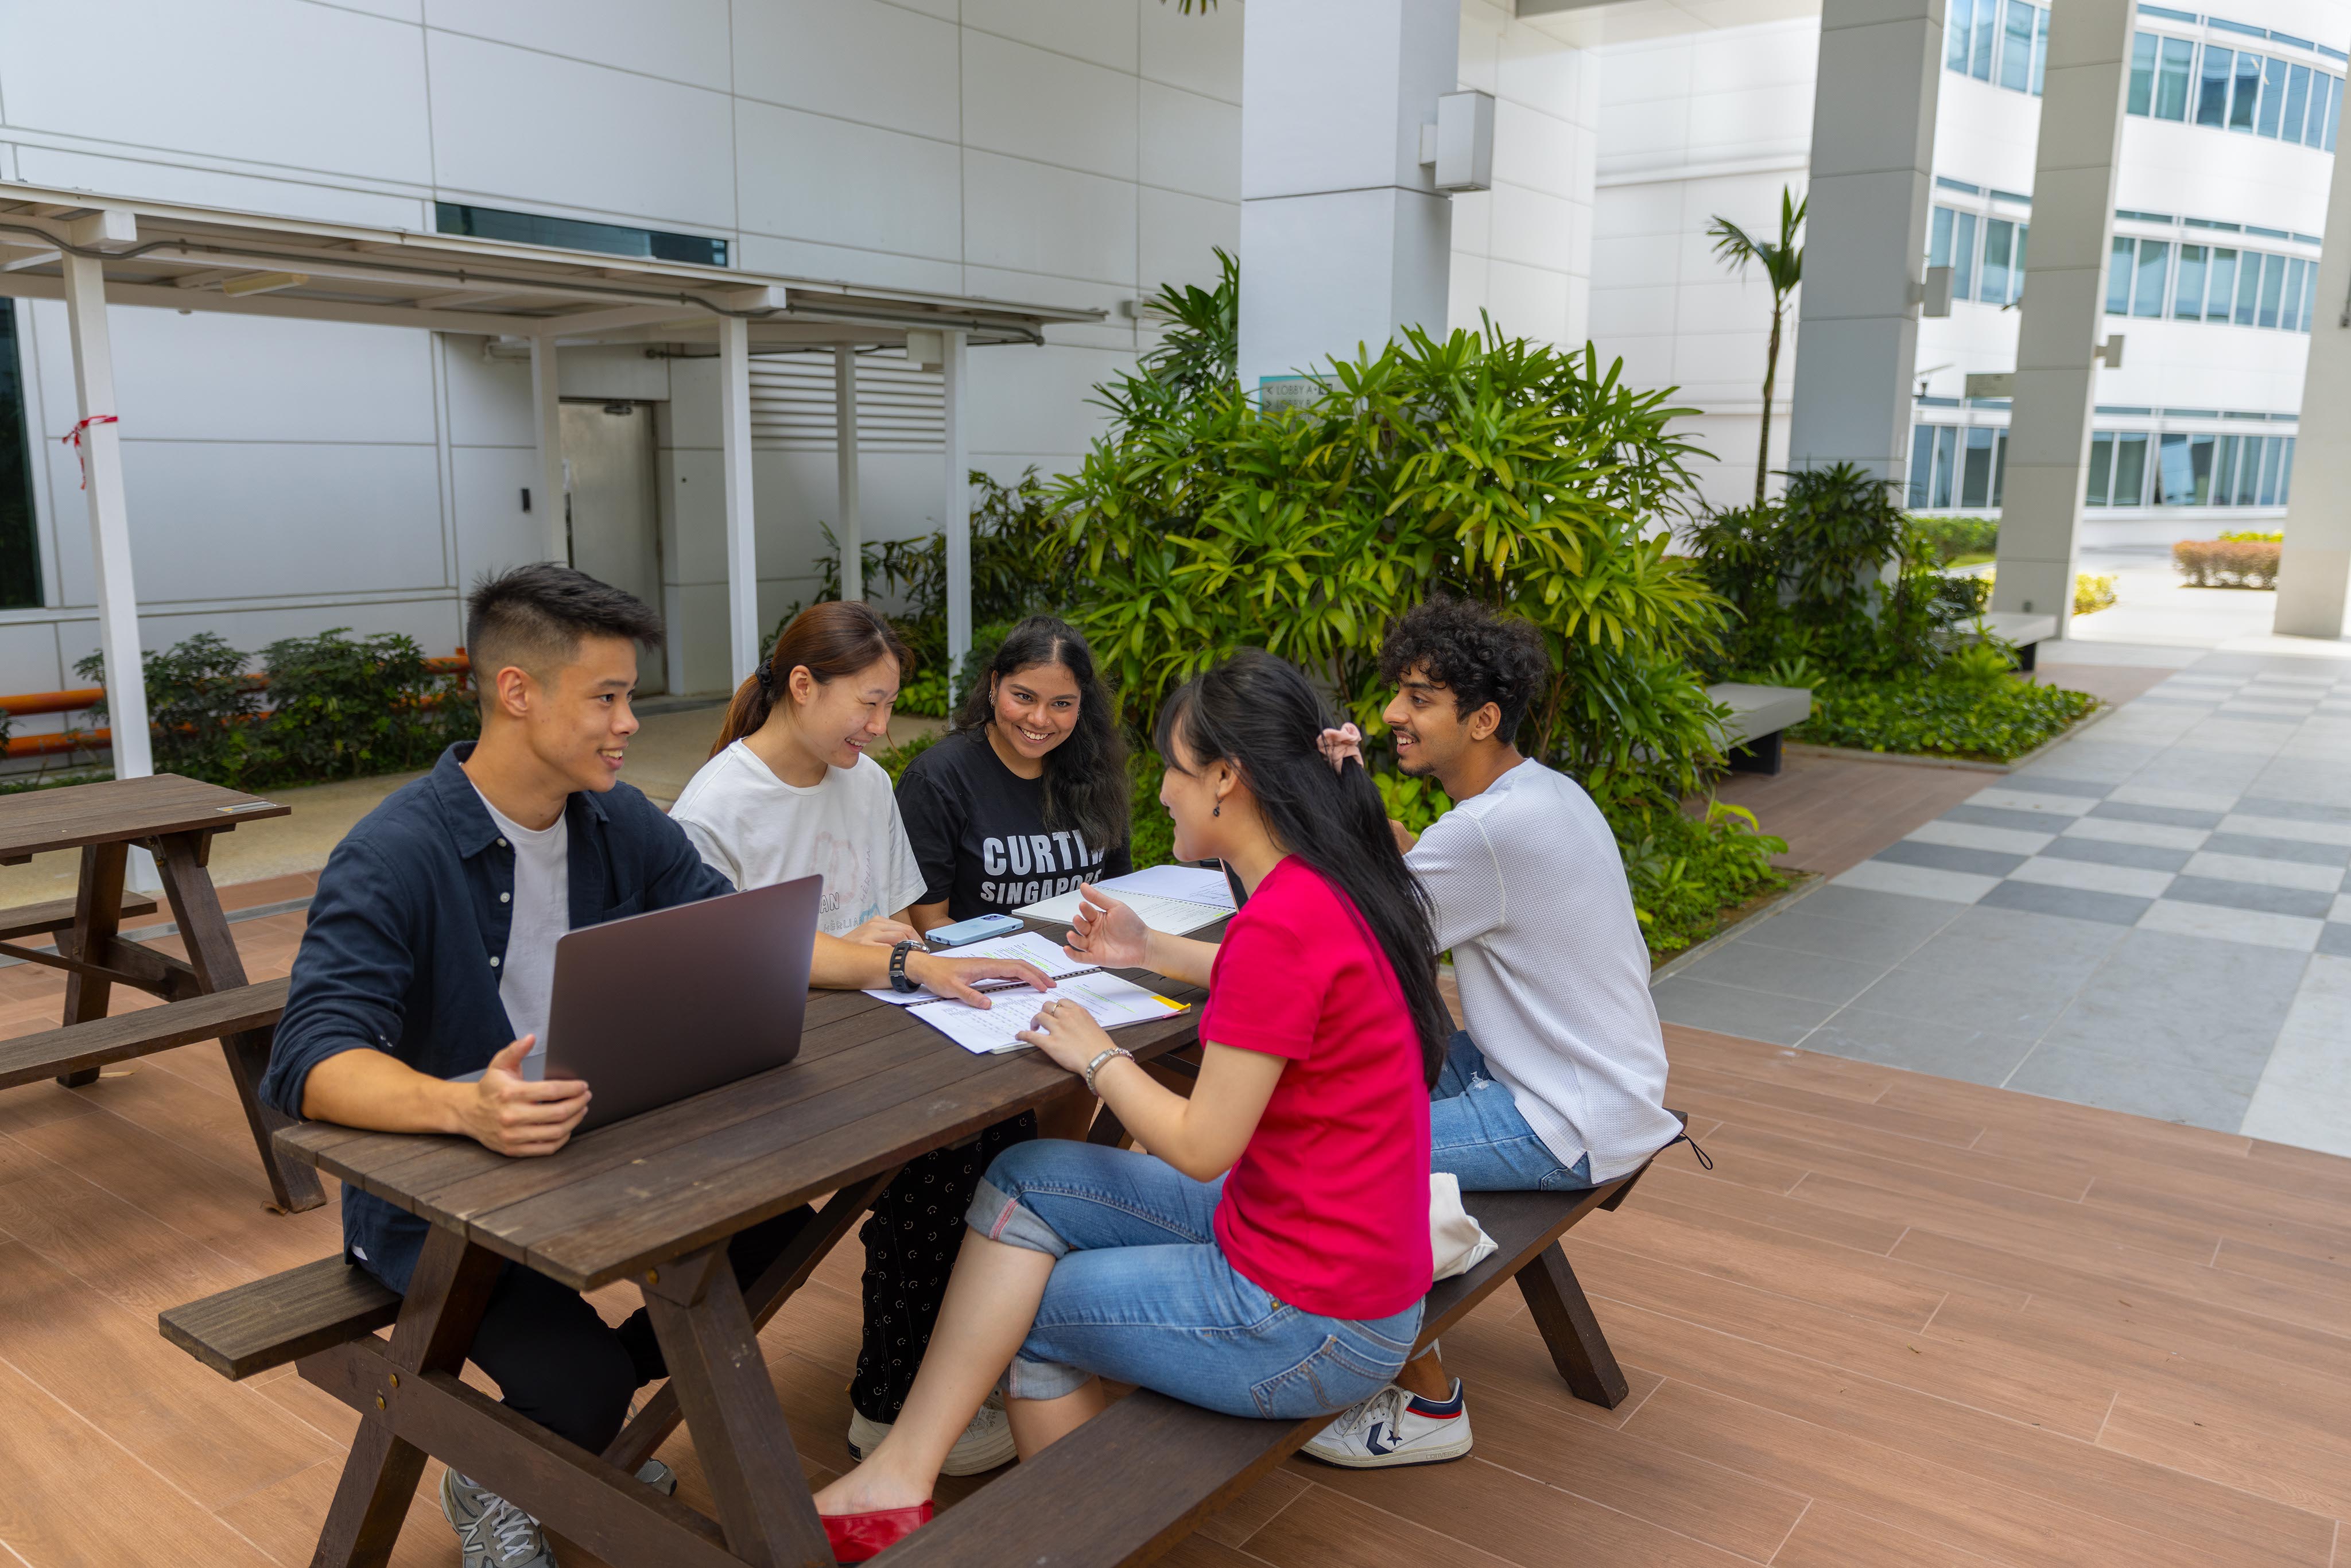 On sunny days, the Campus Courtyard makes for a great hangout spot in between classes, or a good place to enjoy a quiet alfresco lunch. Image courtesy of Curtin Singapore.